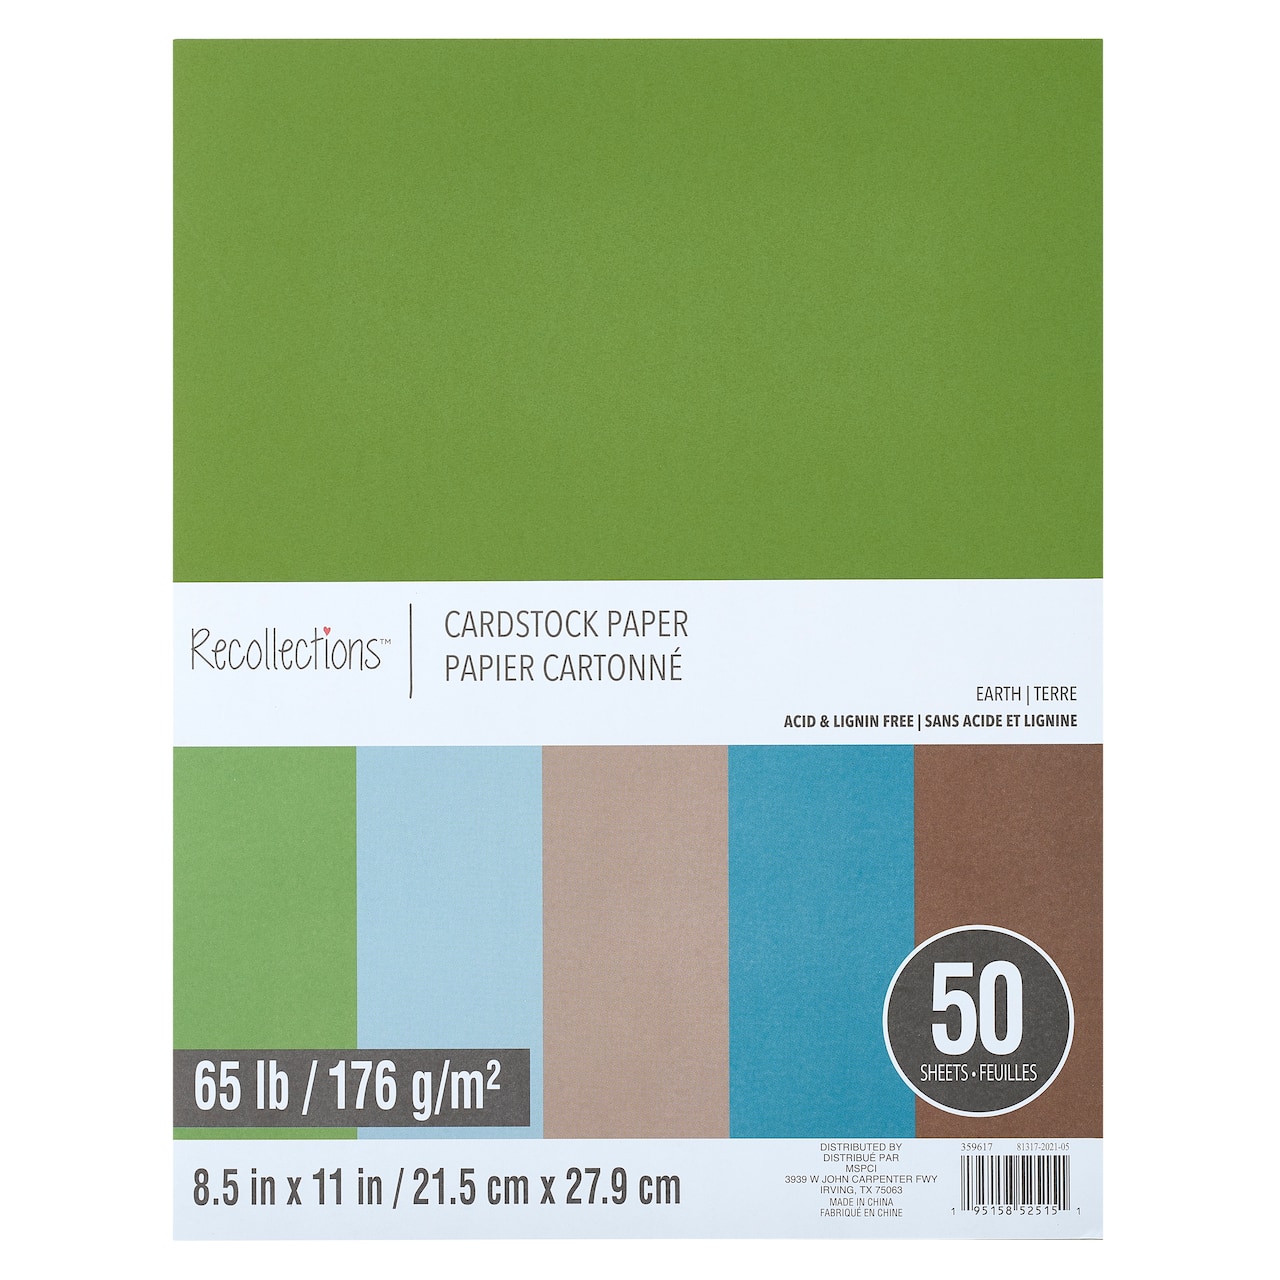 Earth 8.5 x 11 Cardstock Paper by Recollections®, 50 Sheets